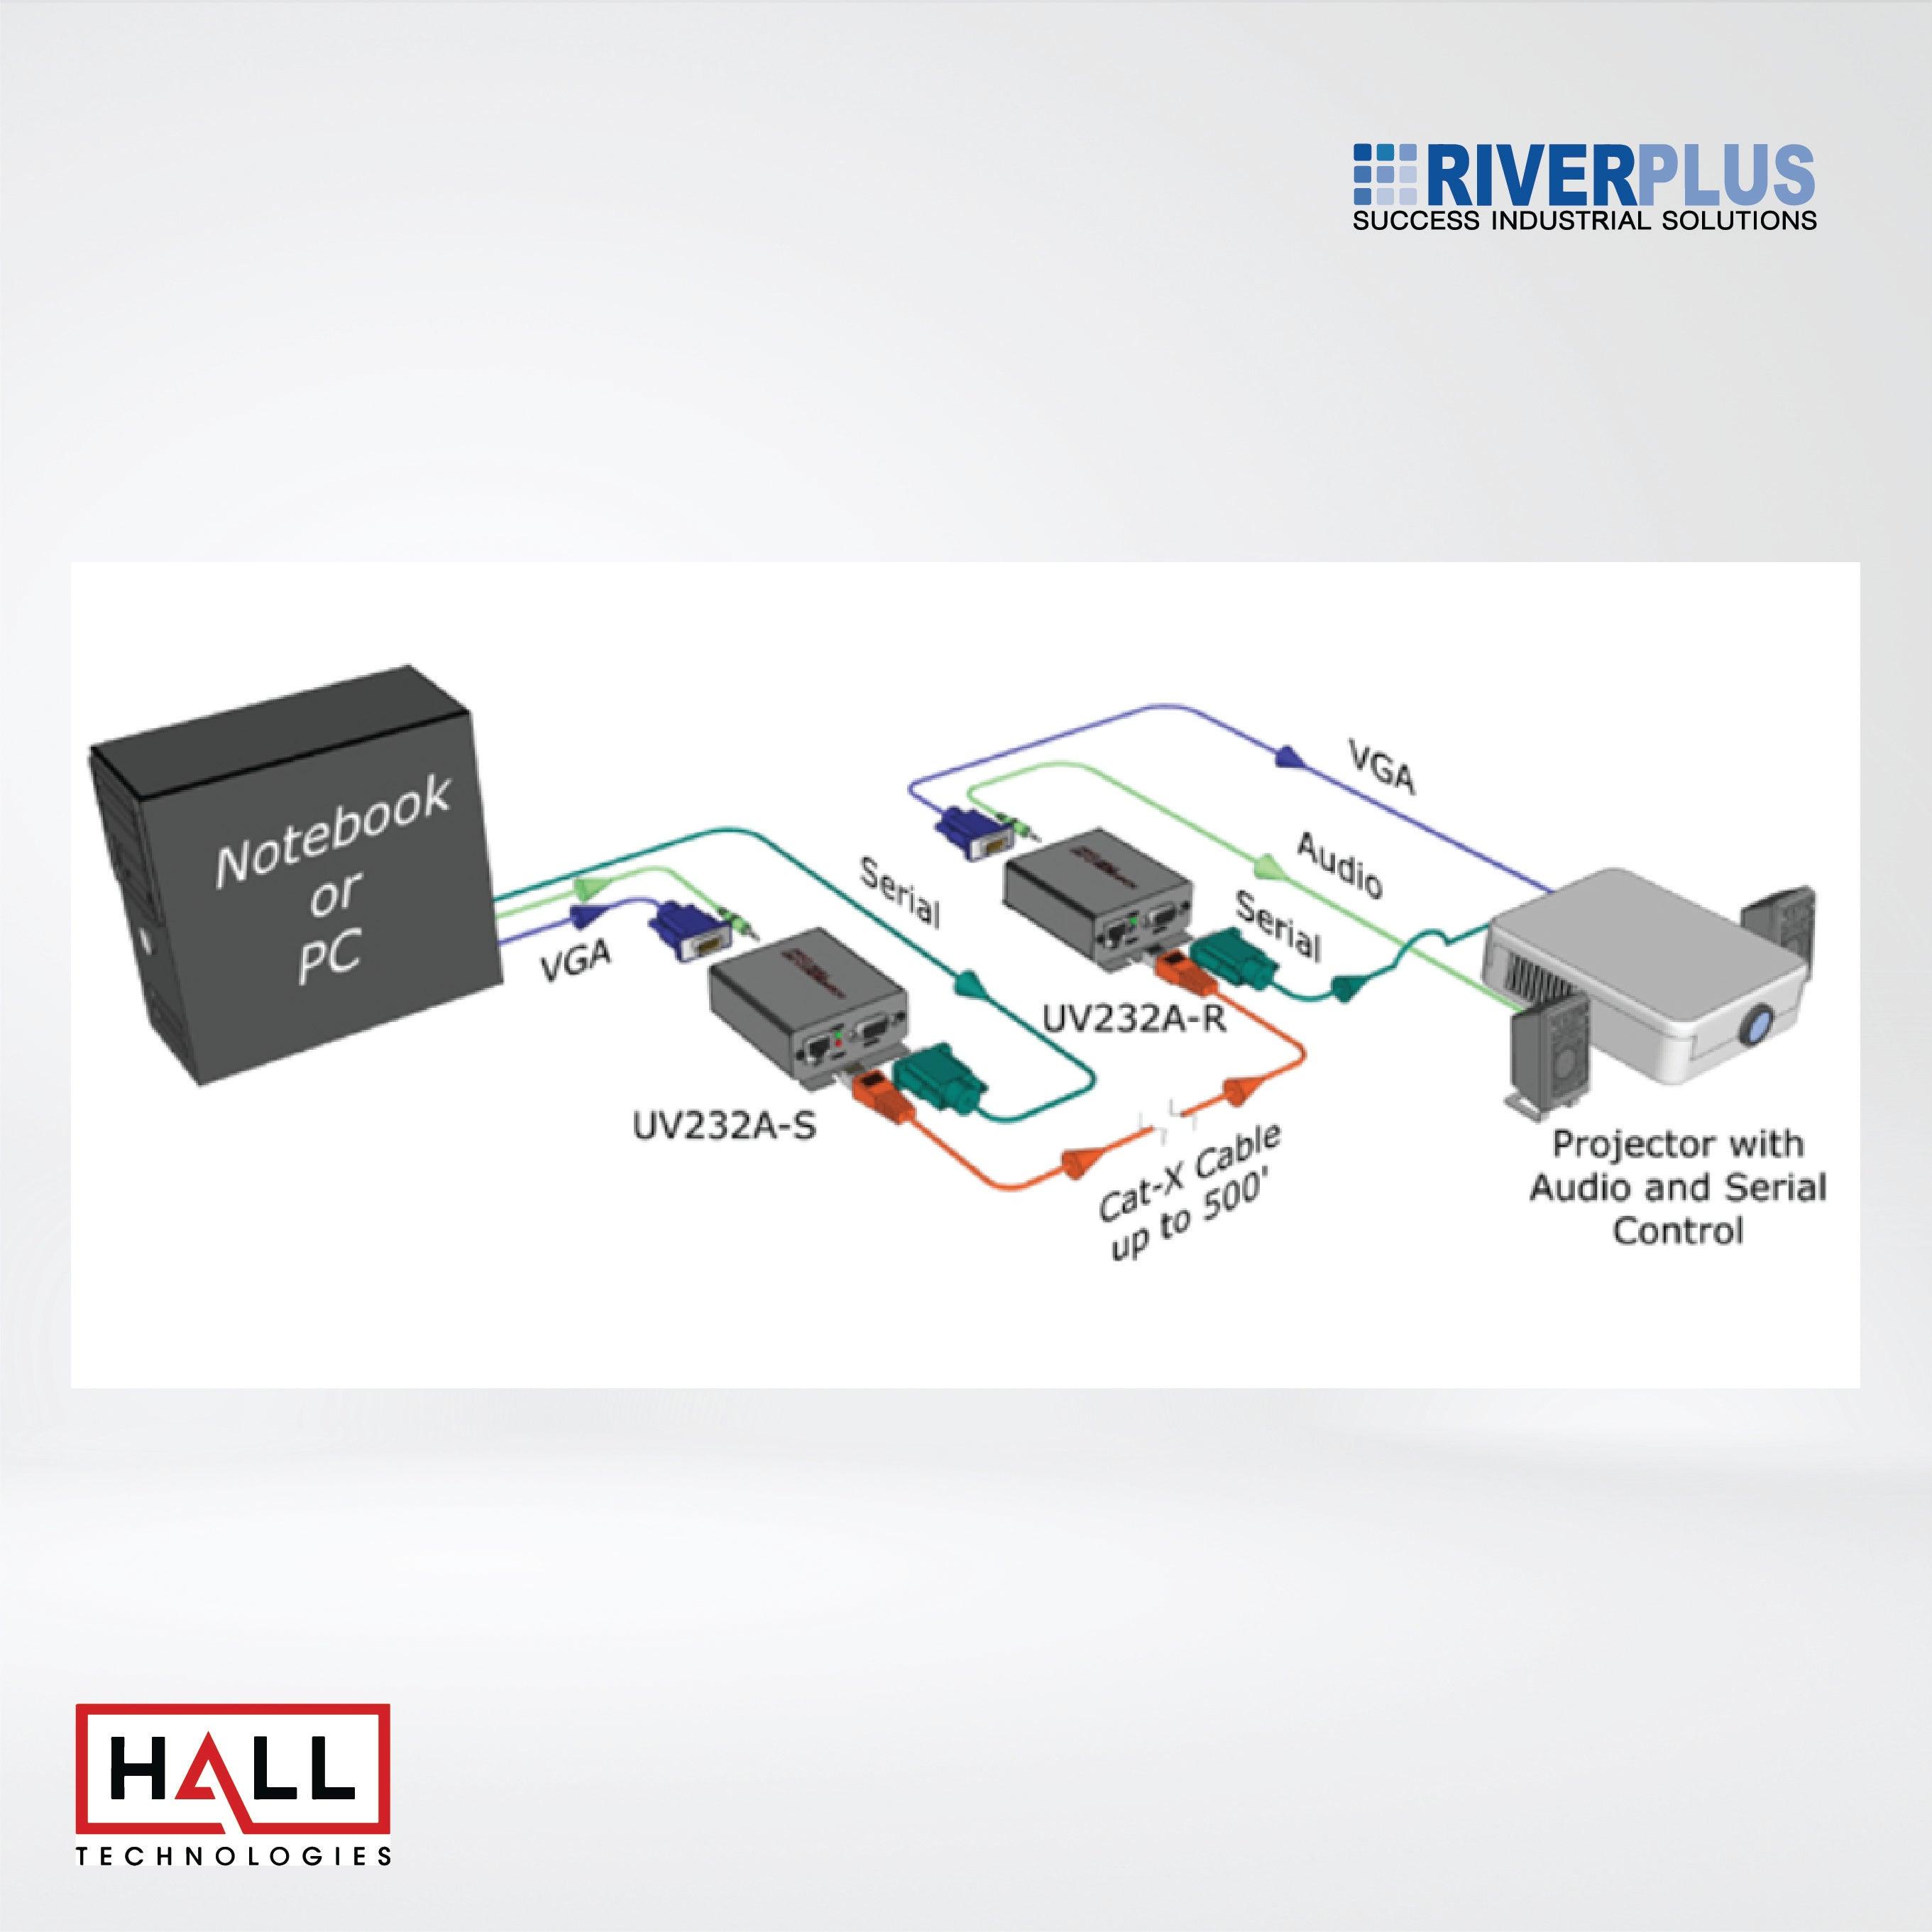 UV232A-S VGA, Audio and Uni-Directional RS-232 Sender - Riverplus